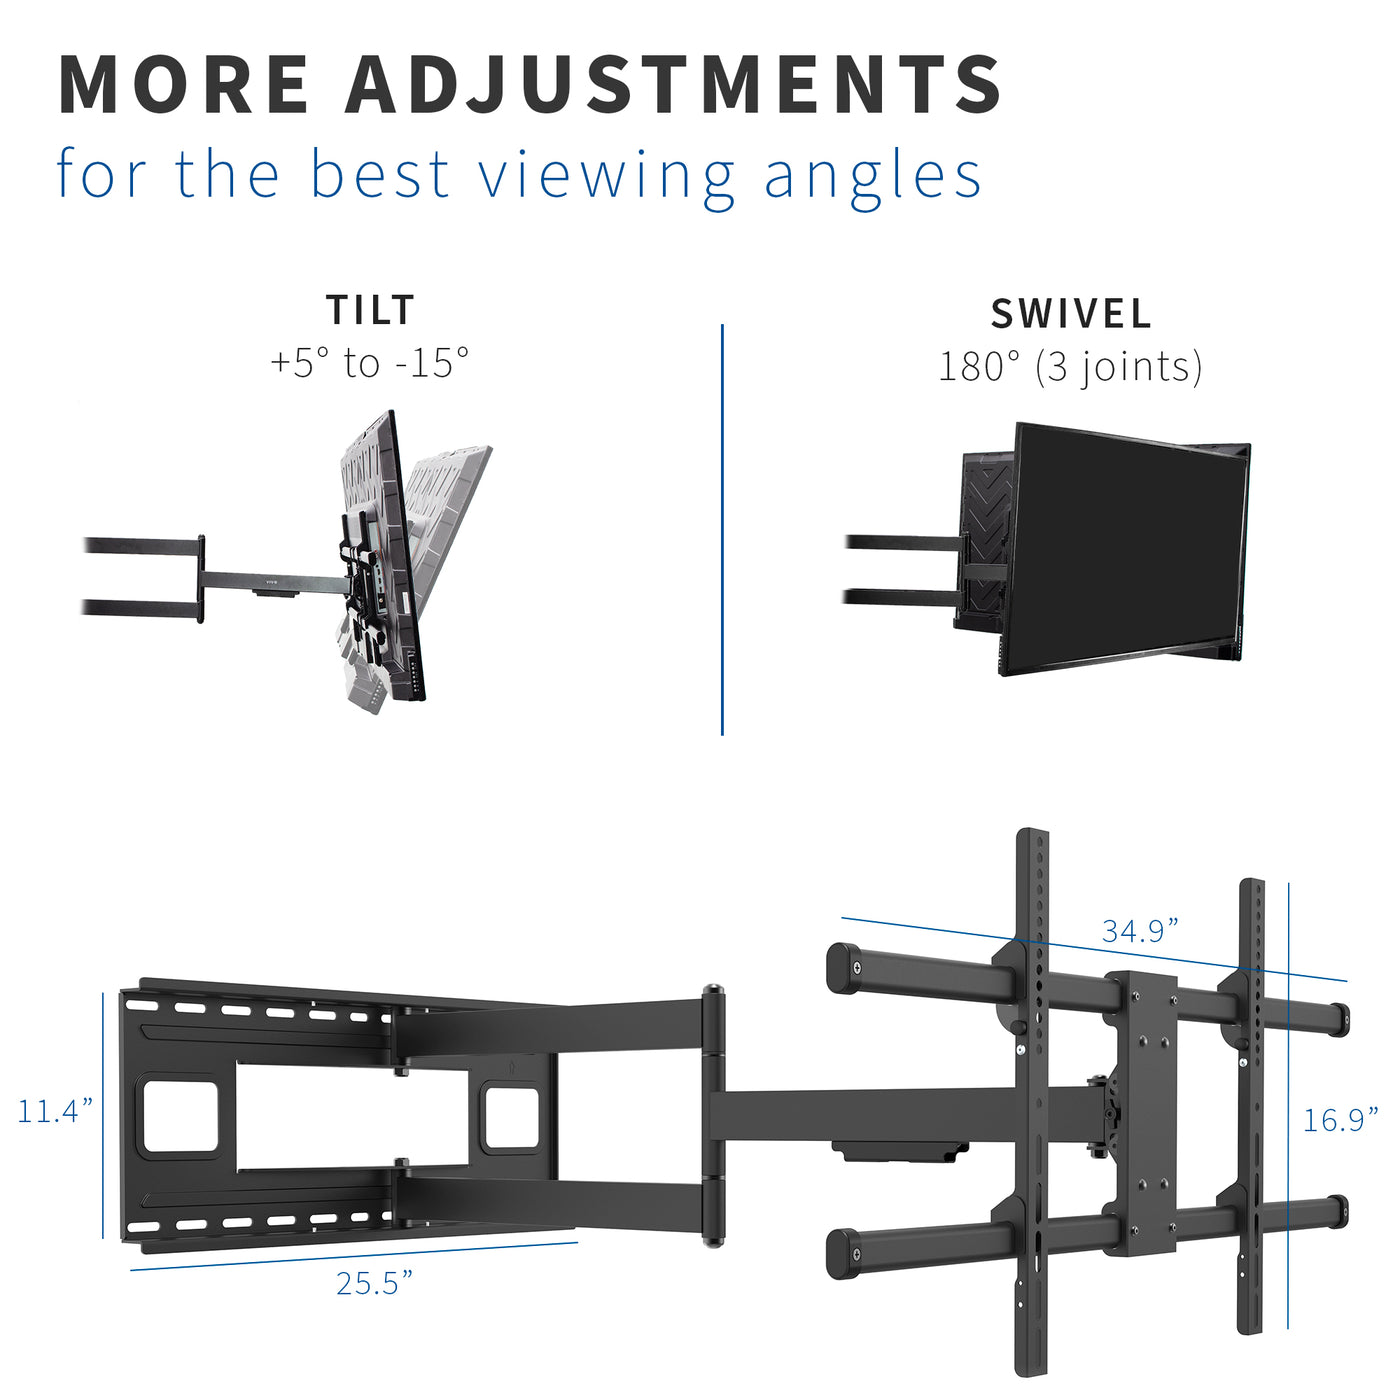 Adjustment types of Large TV wall mounts include tilt, swivel, and extension from the main frame.